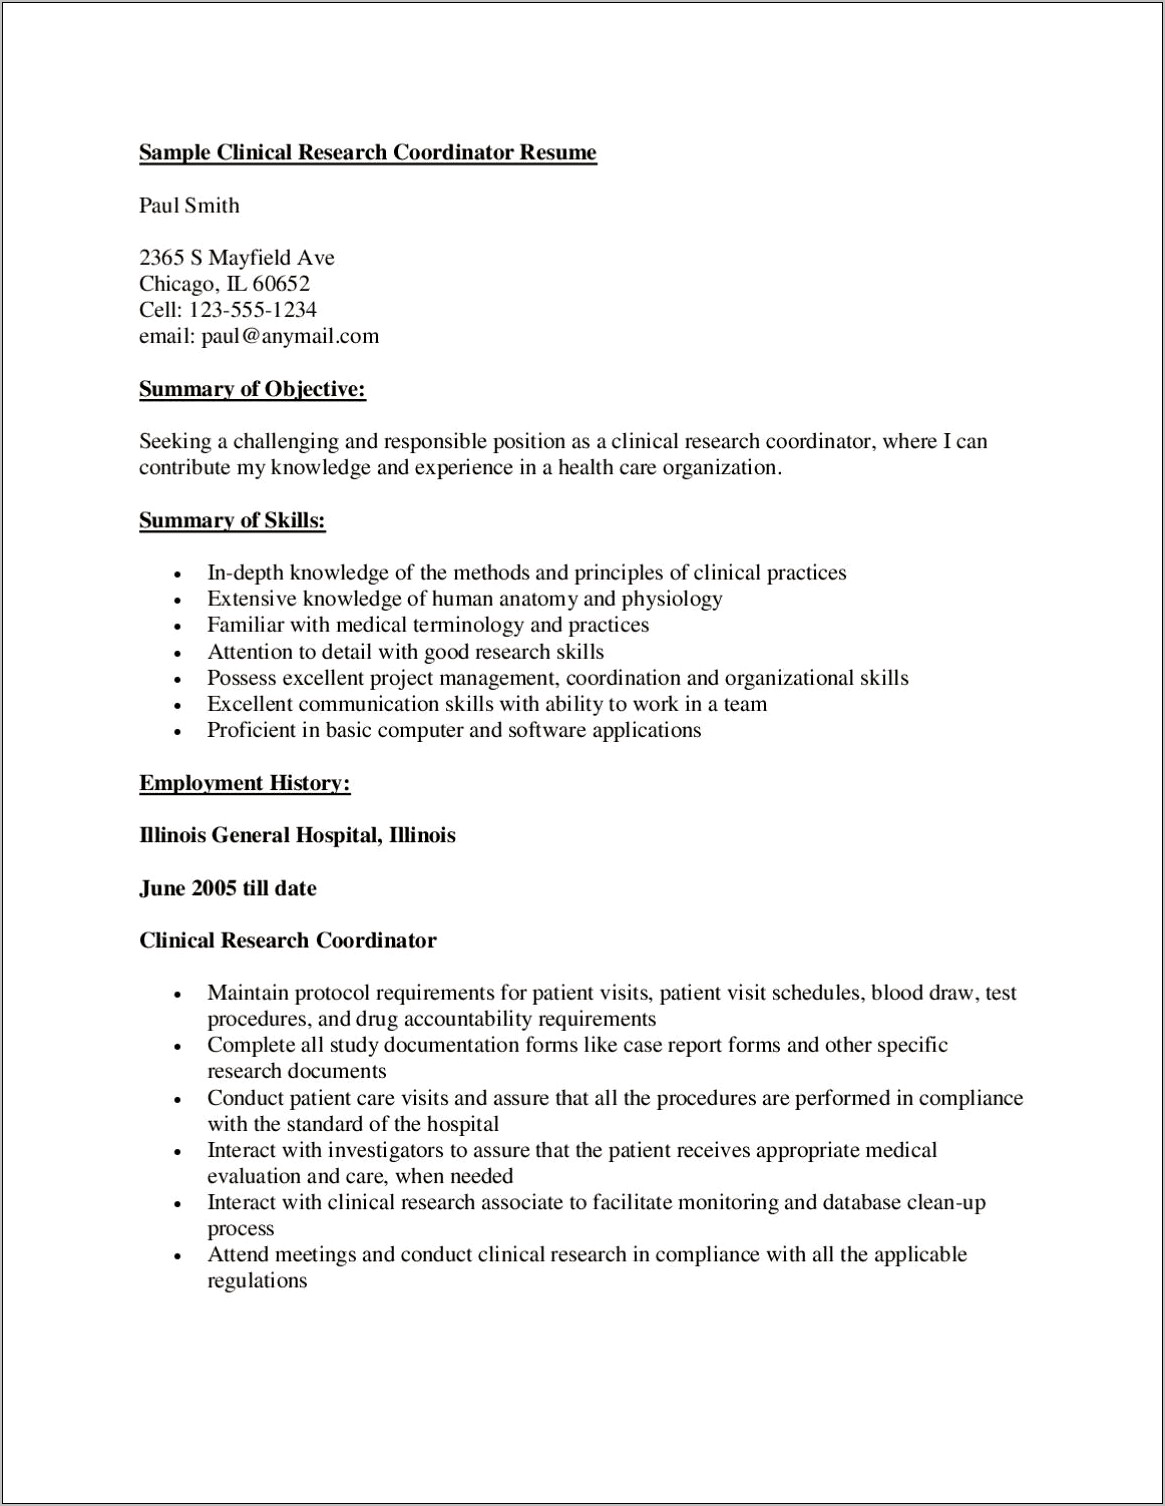 Professional Summary Resume Clinical Research Coordinatoe